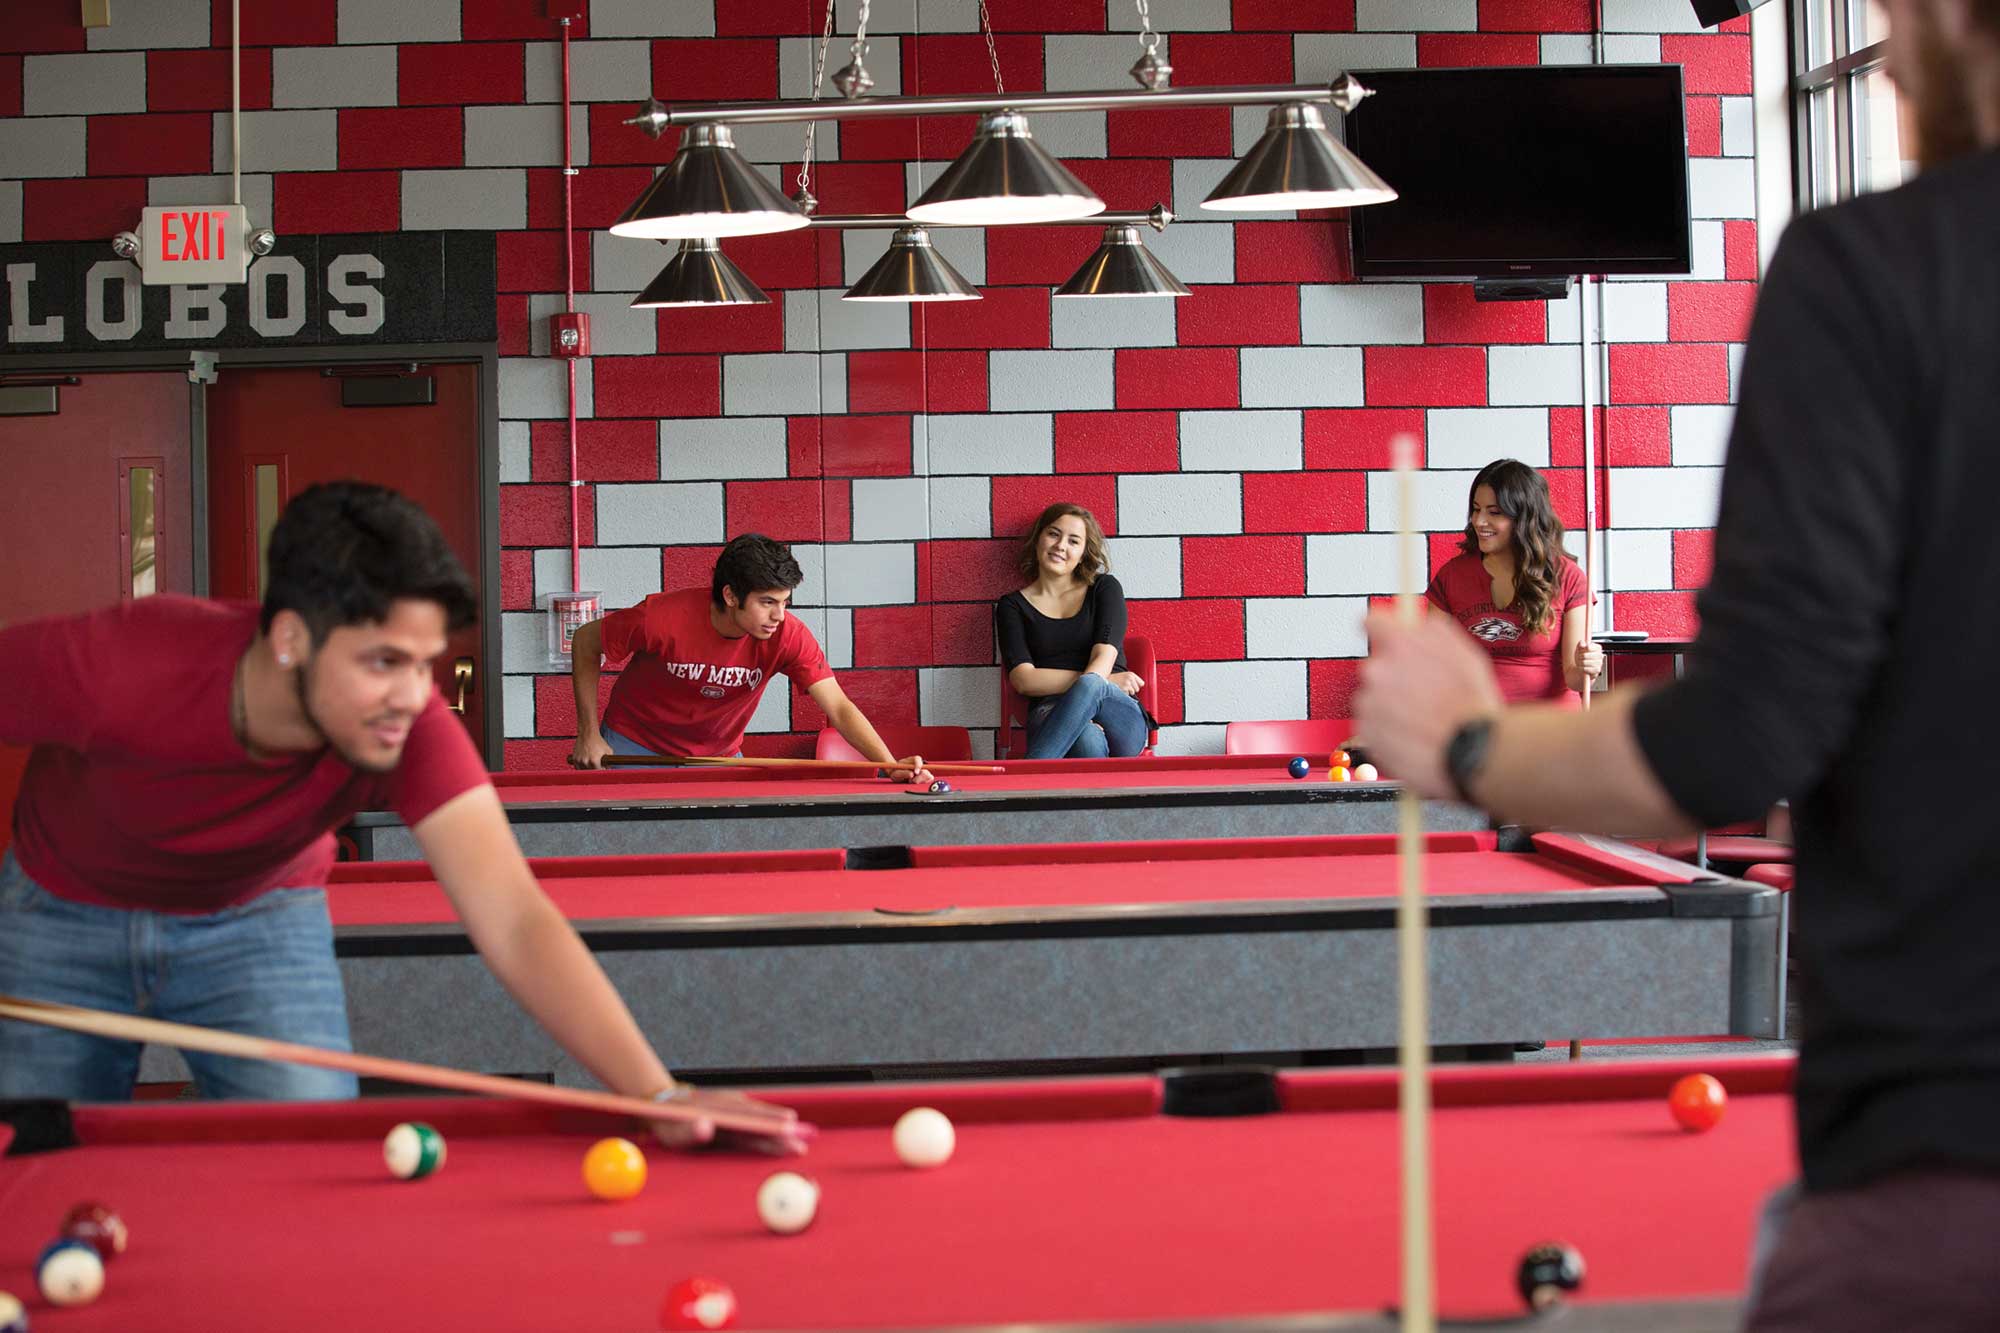 Students playing pool.